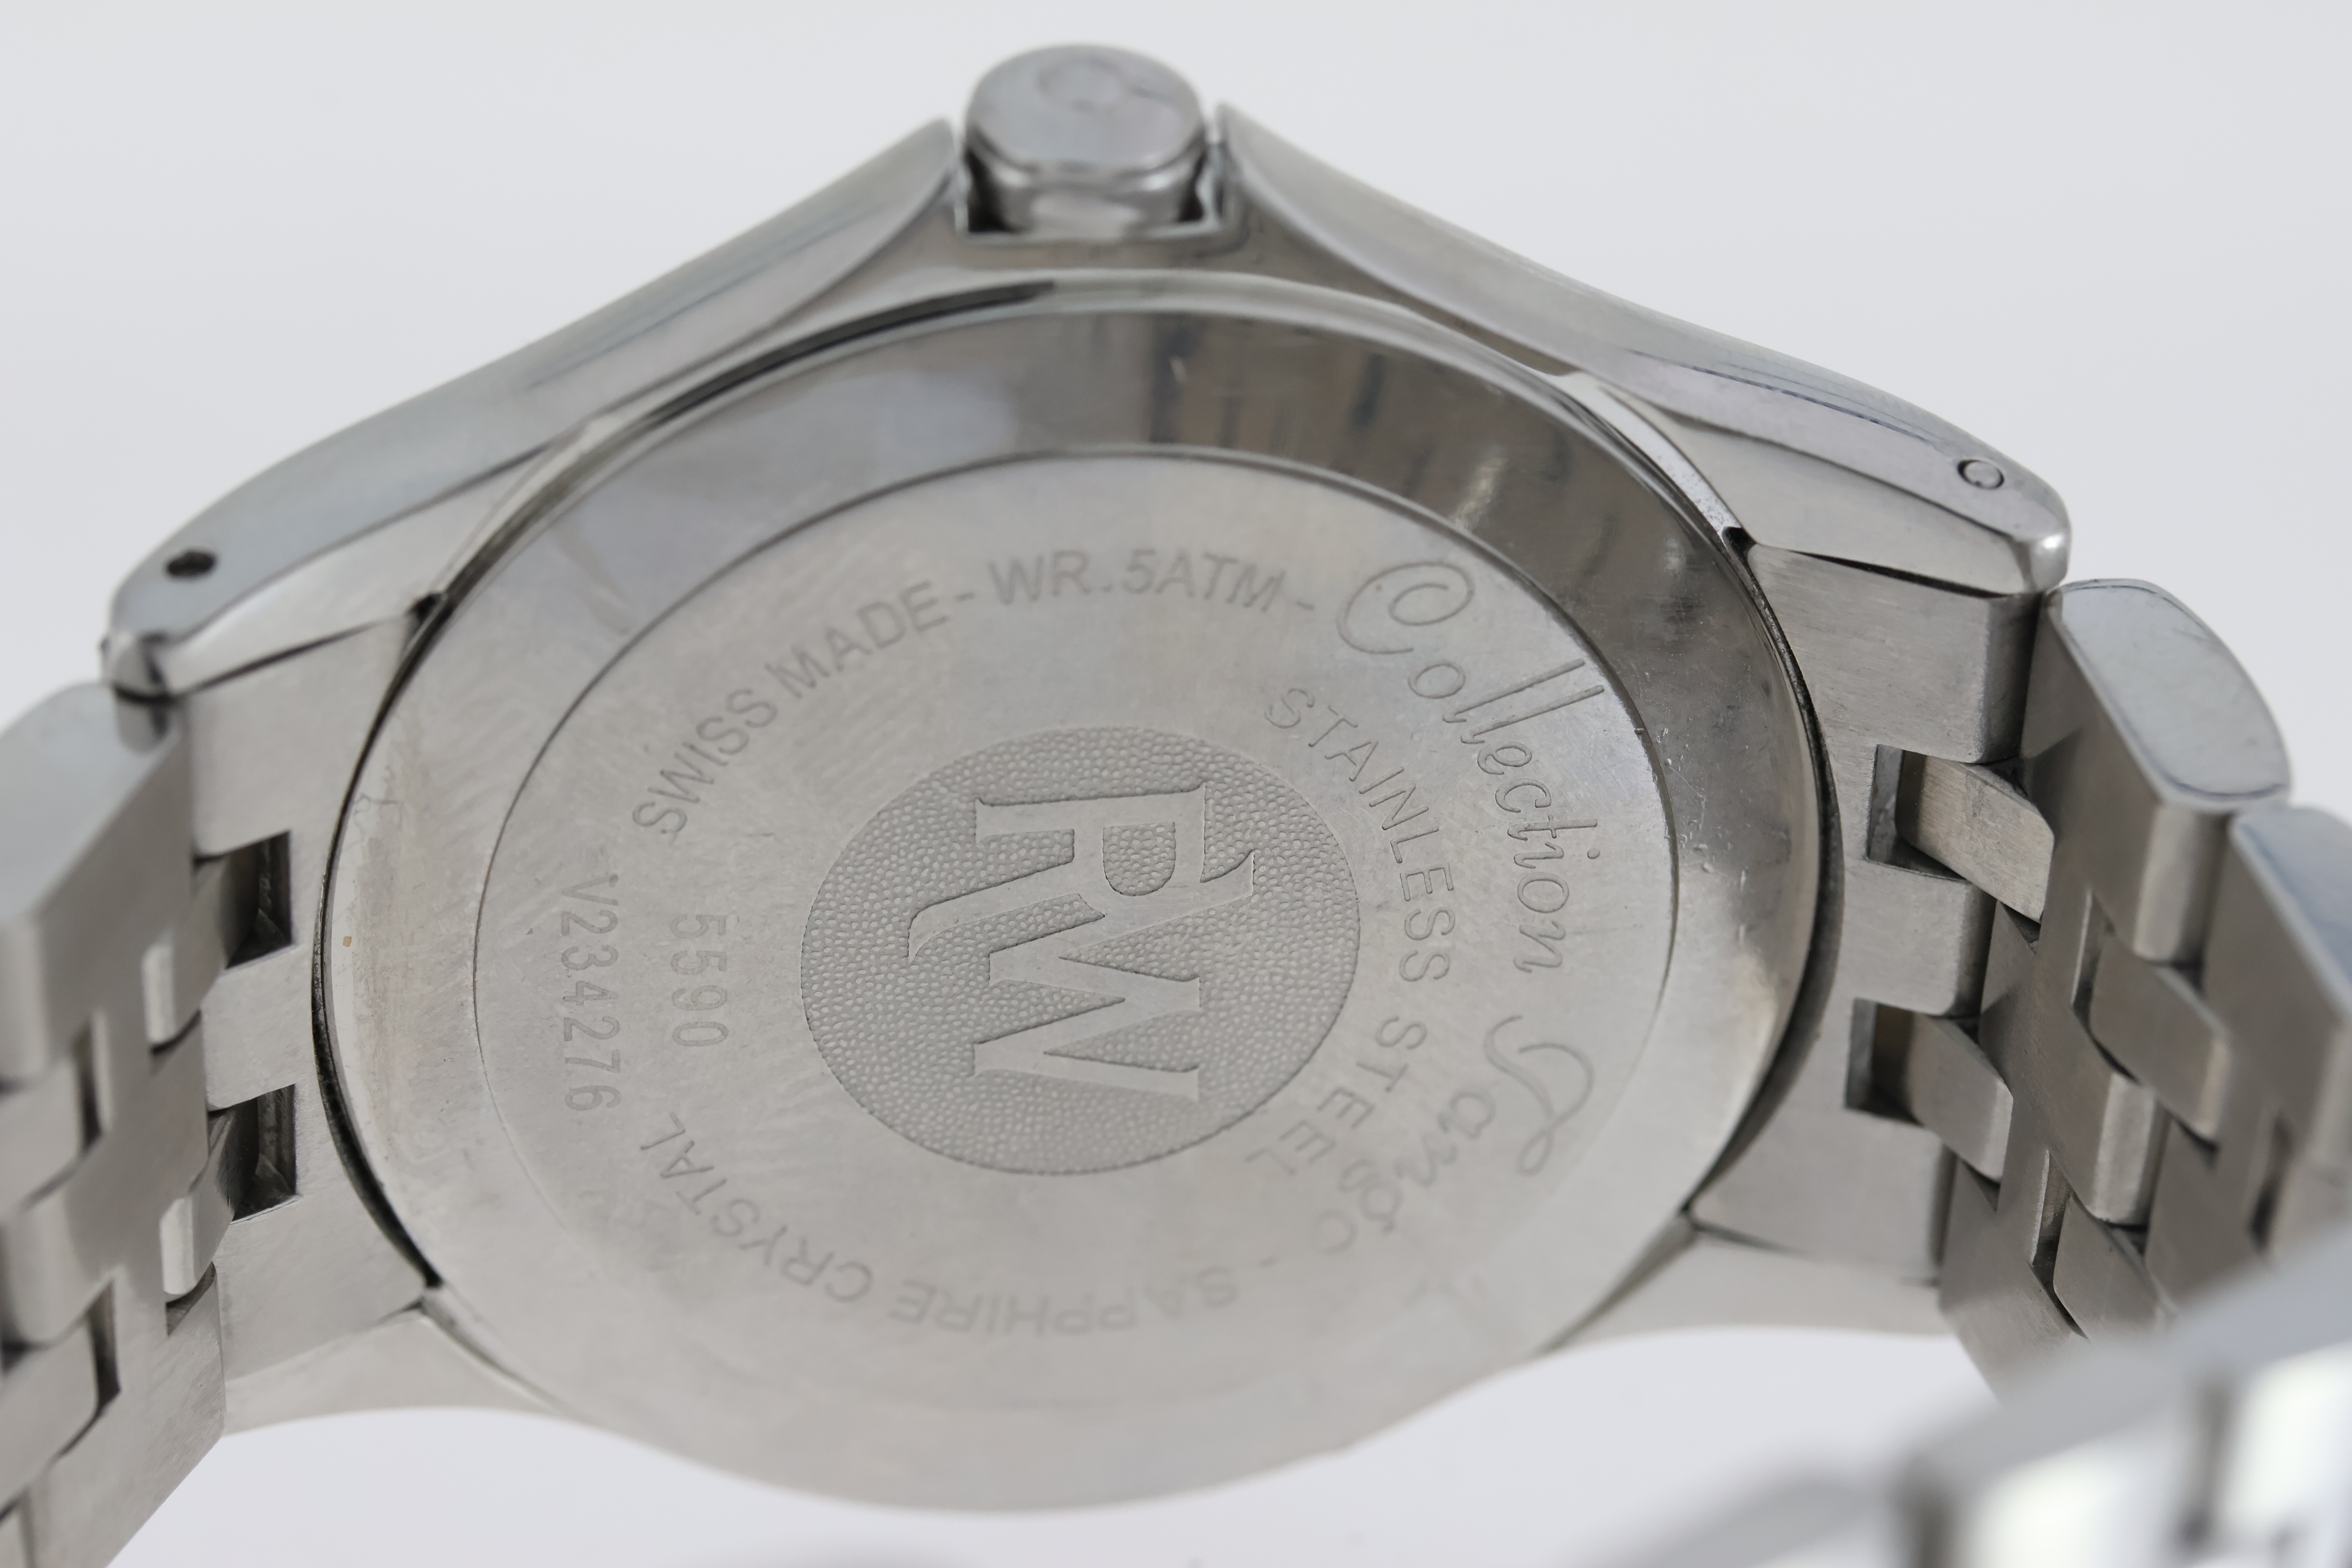 RAYMOND WEIL TANGO QUARTZ WATCH REFERENCE 5590, Approx 38mm stainless steel case with a snap on case - Image 3 of 3